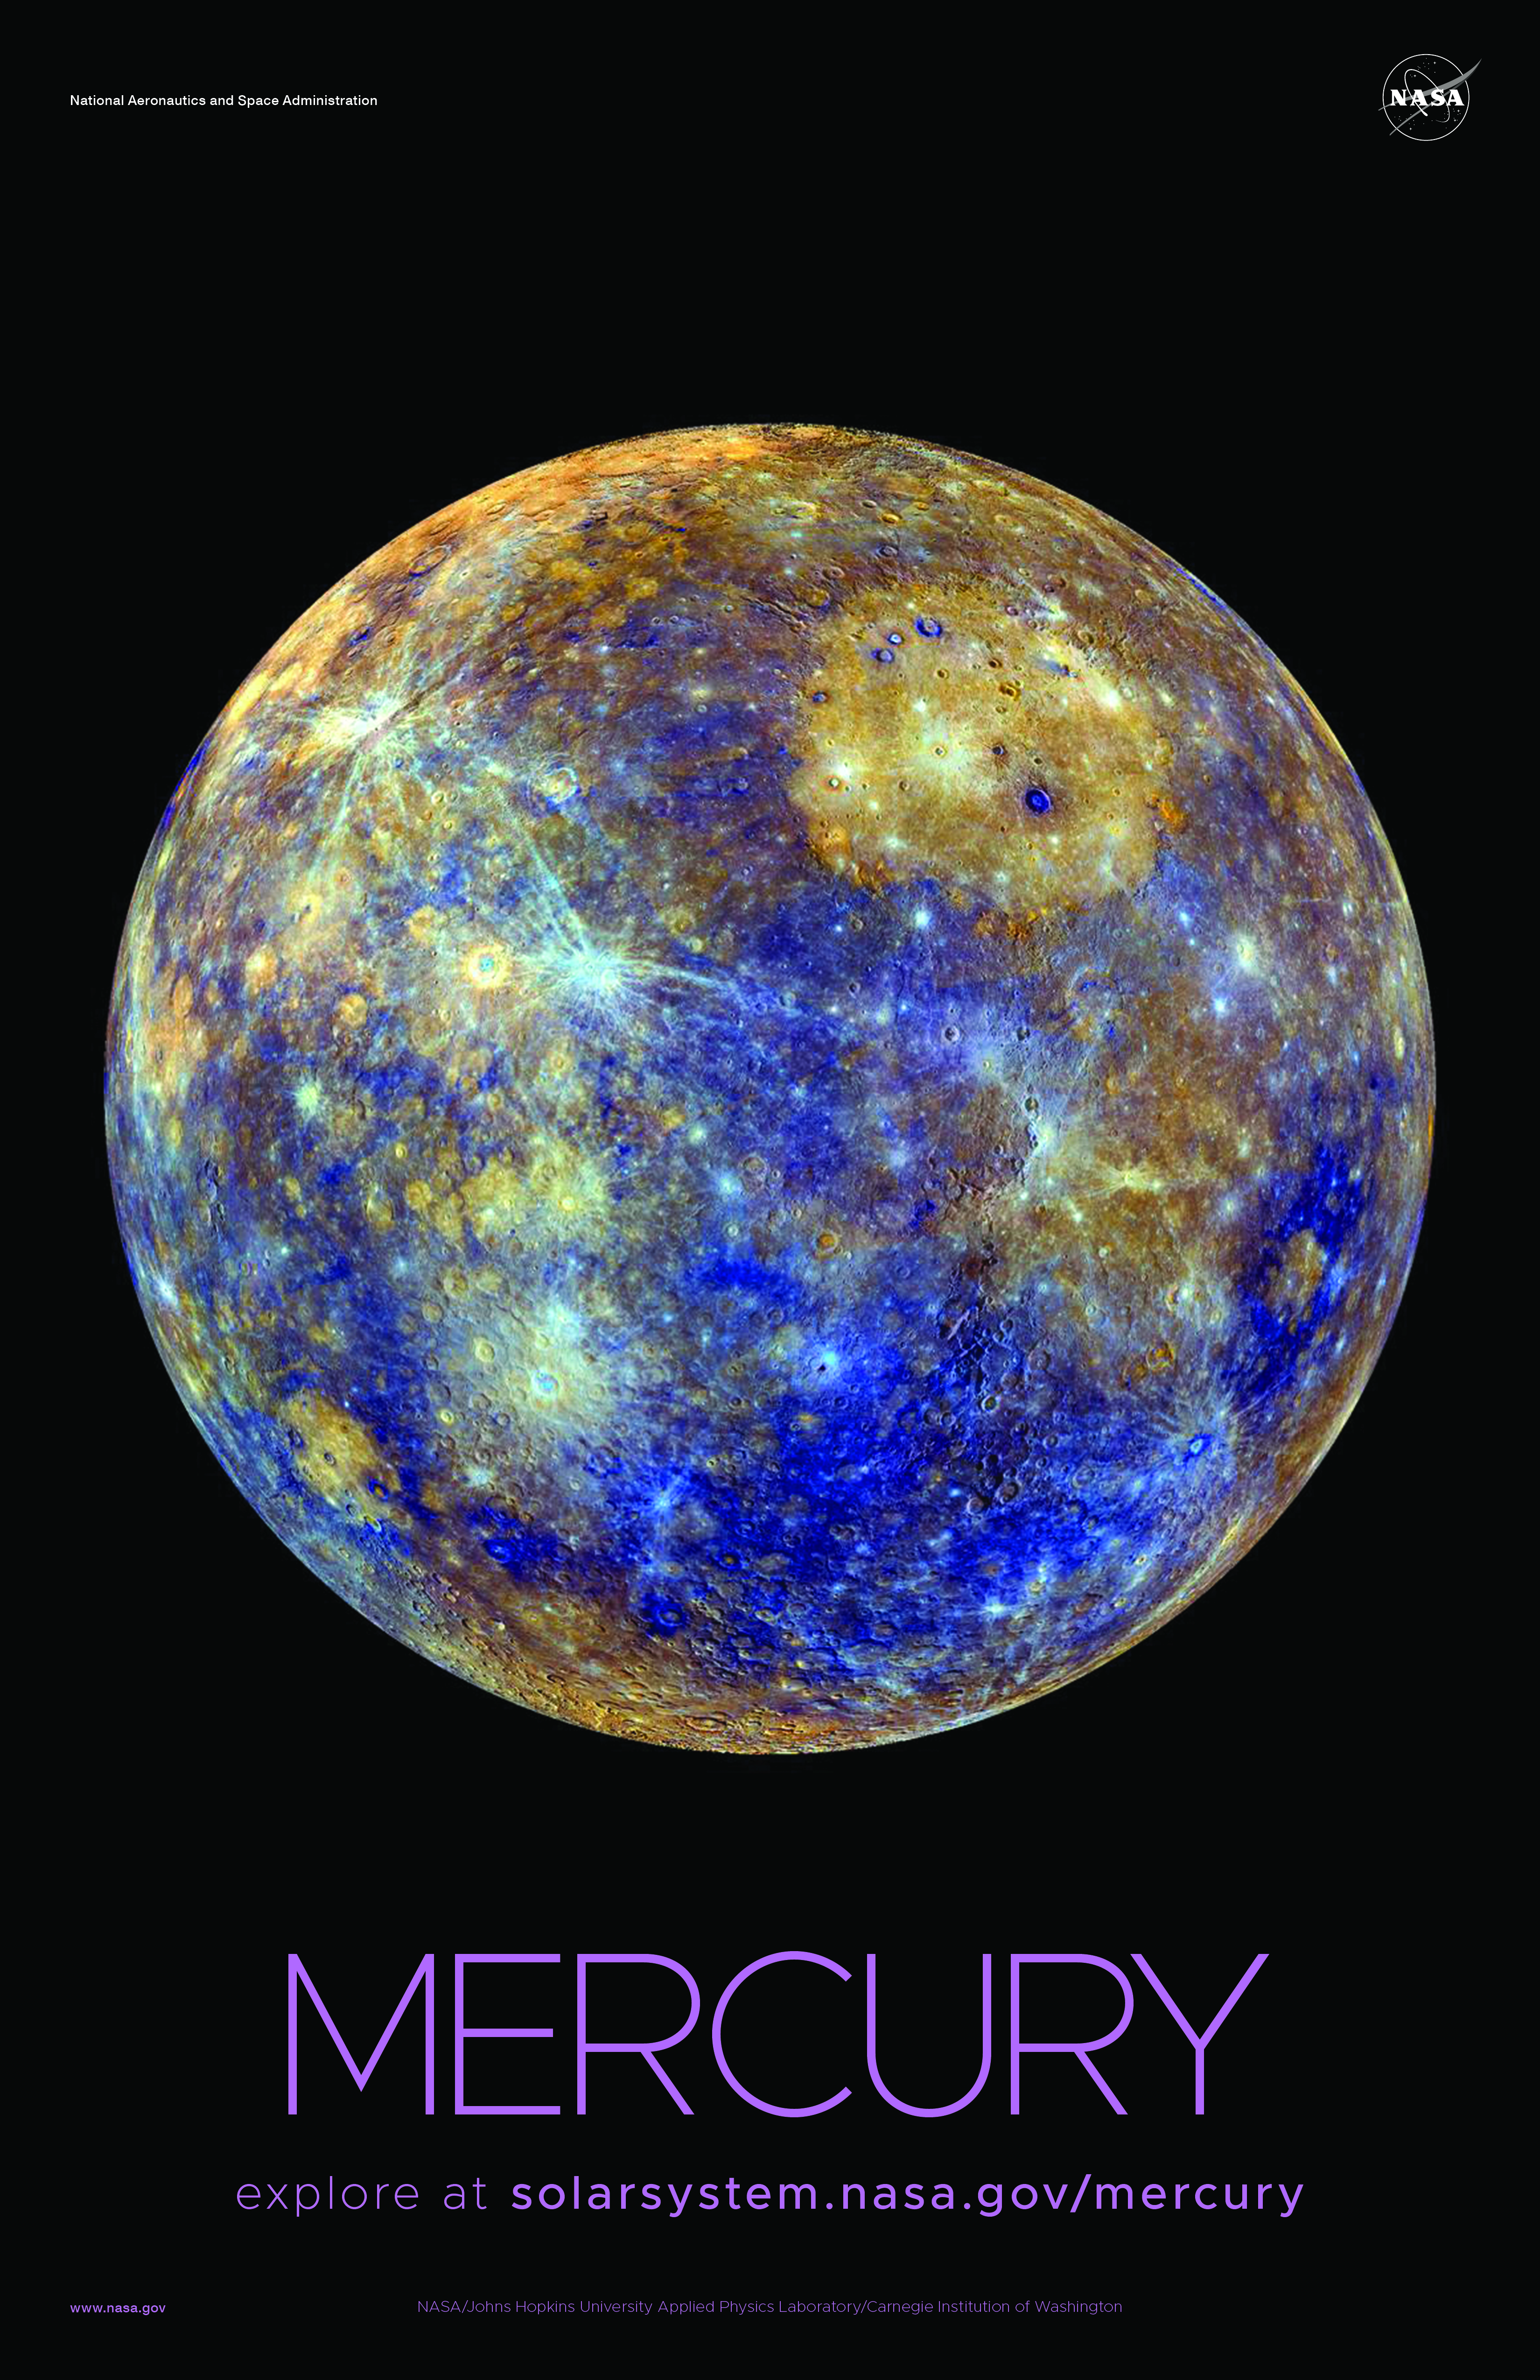 A global view of the planet Mercury is shown in false color.